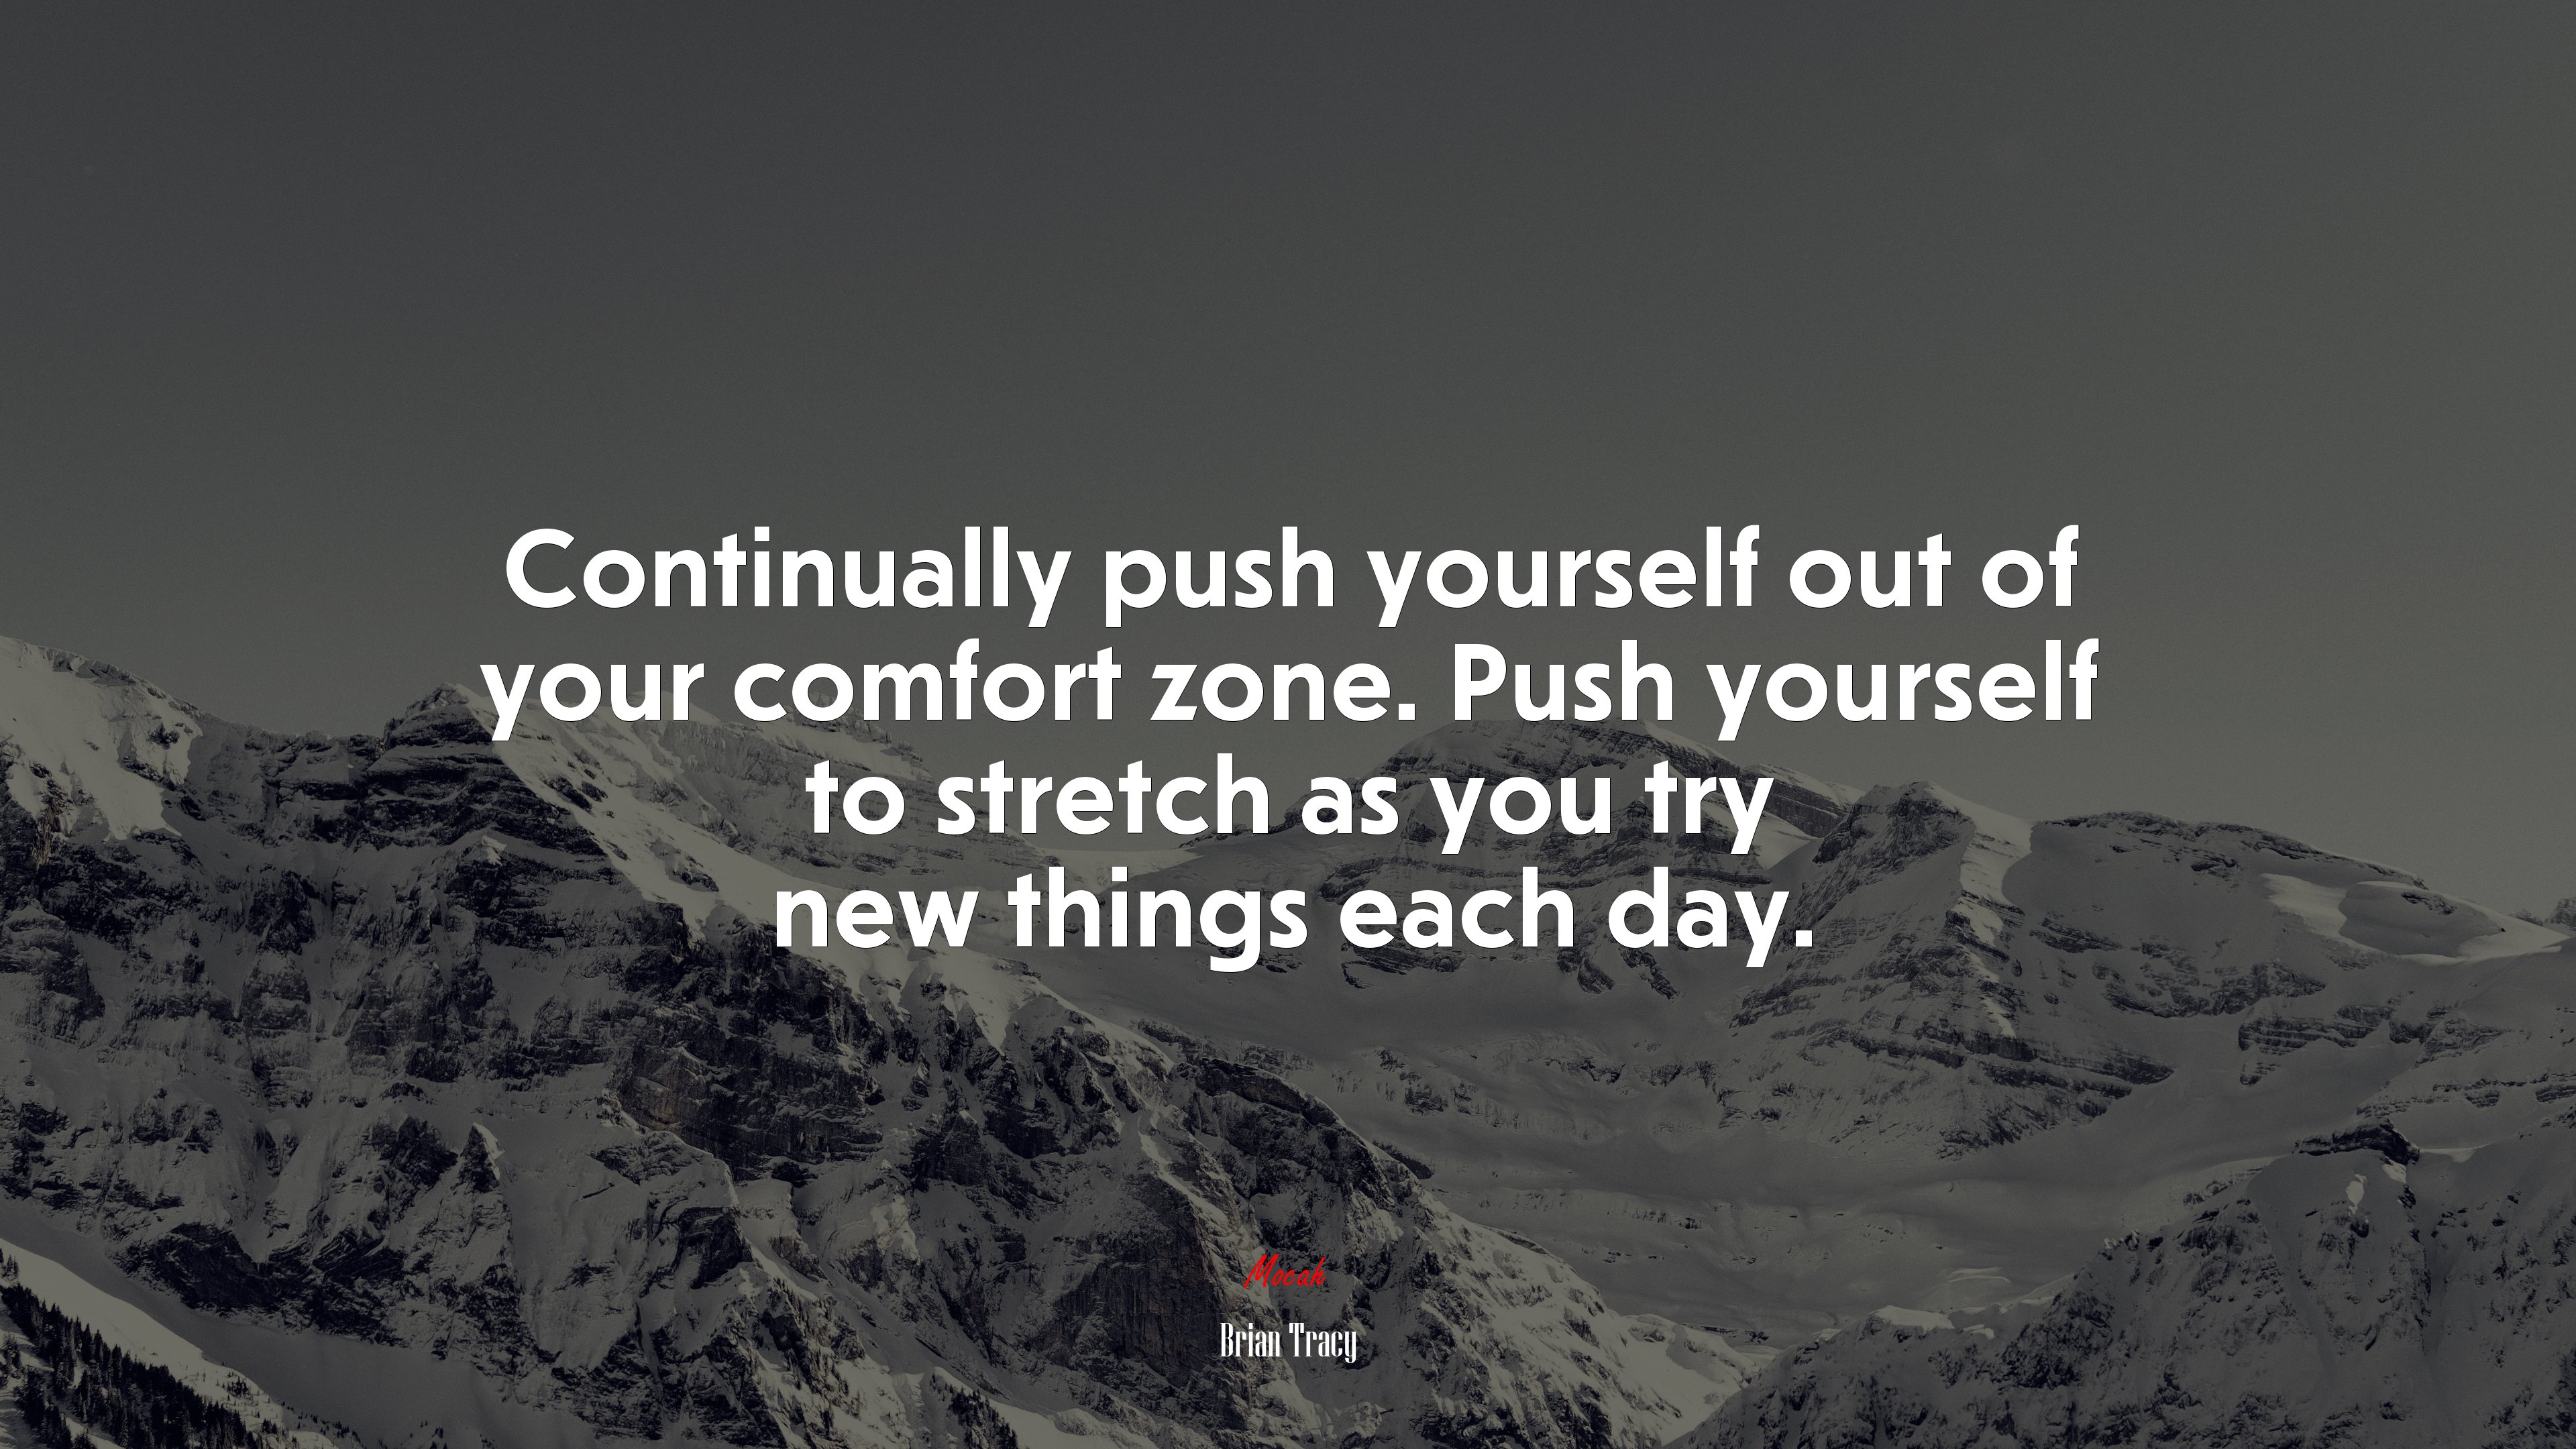 Continually push yourself out of your comfort zone. Push yourself to stretch as you try new things each day. Brian Tracy quote, 4k wallpaper HD Wallpaper